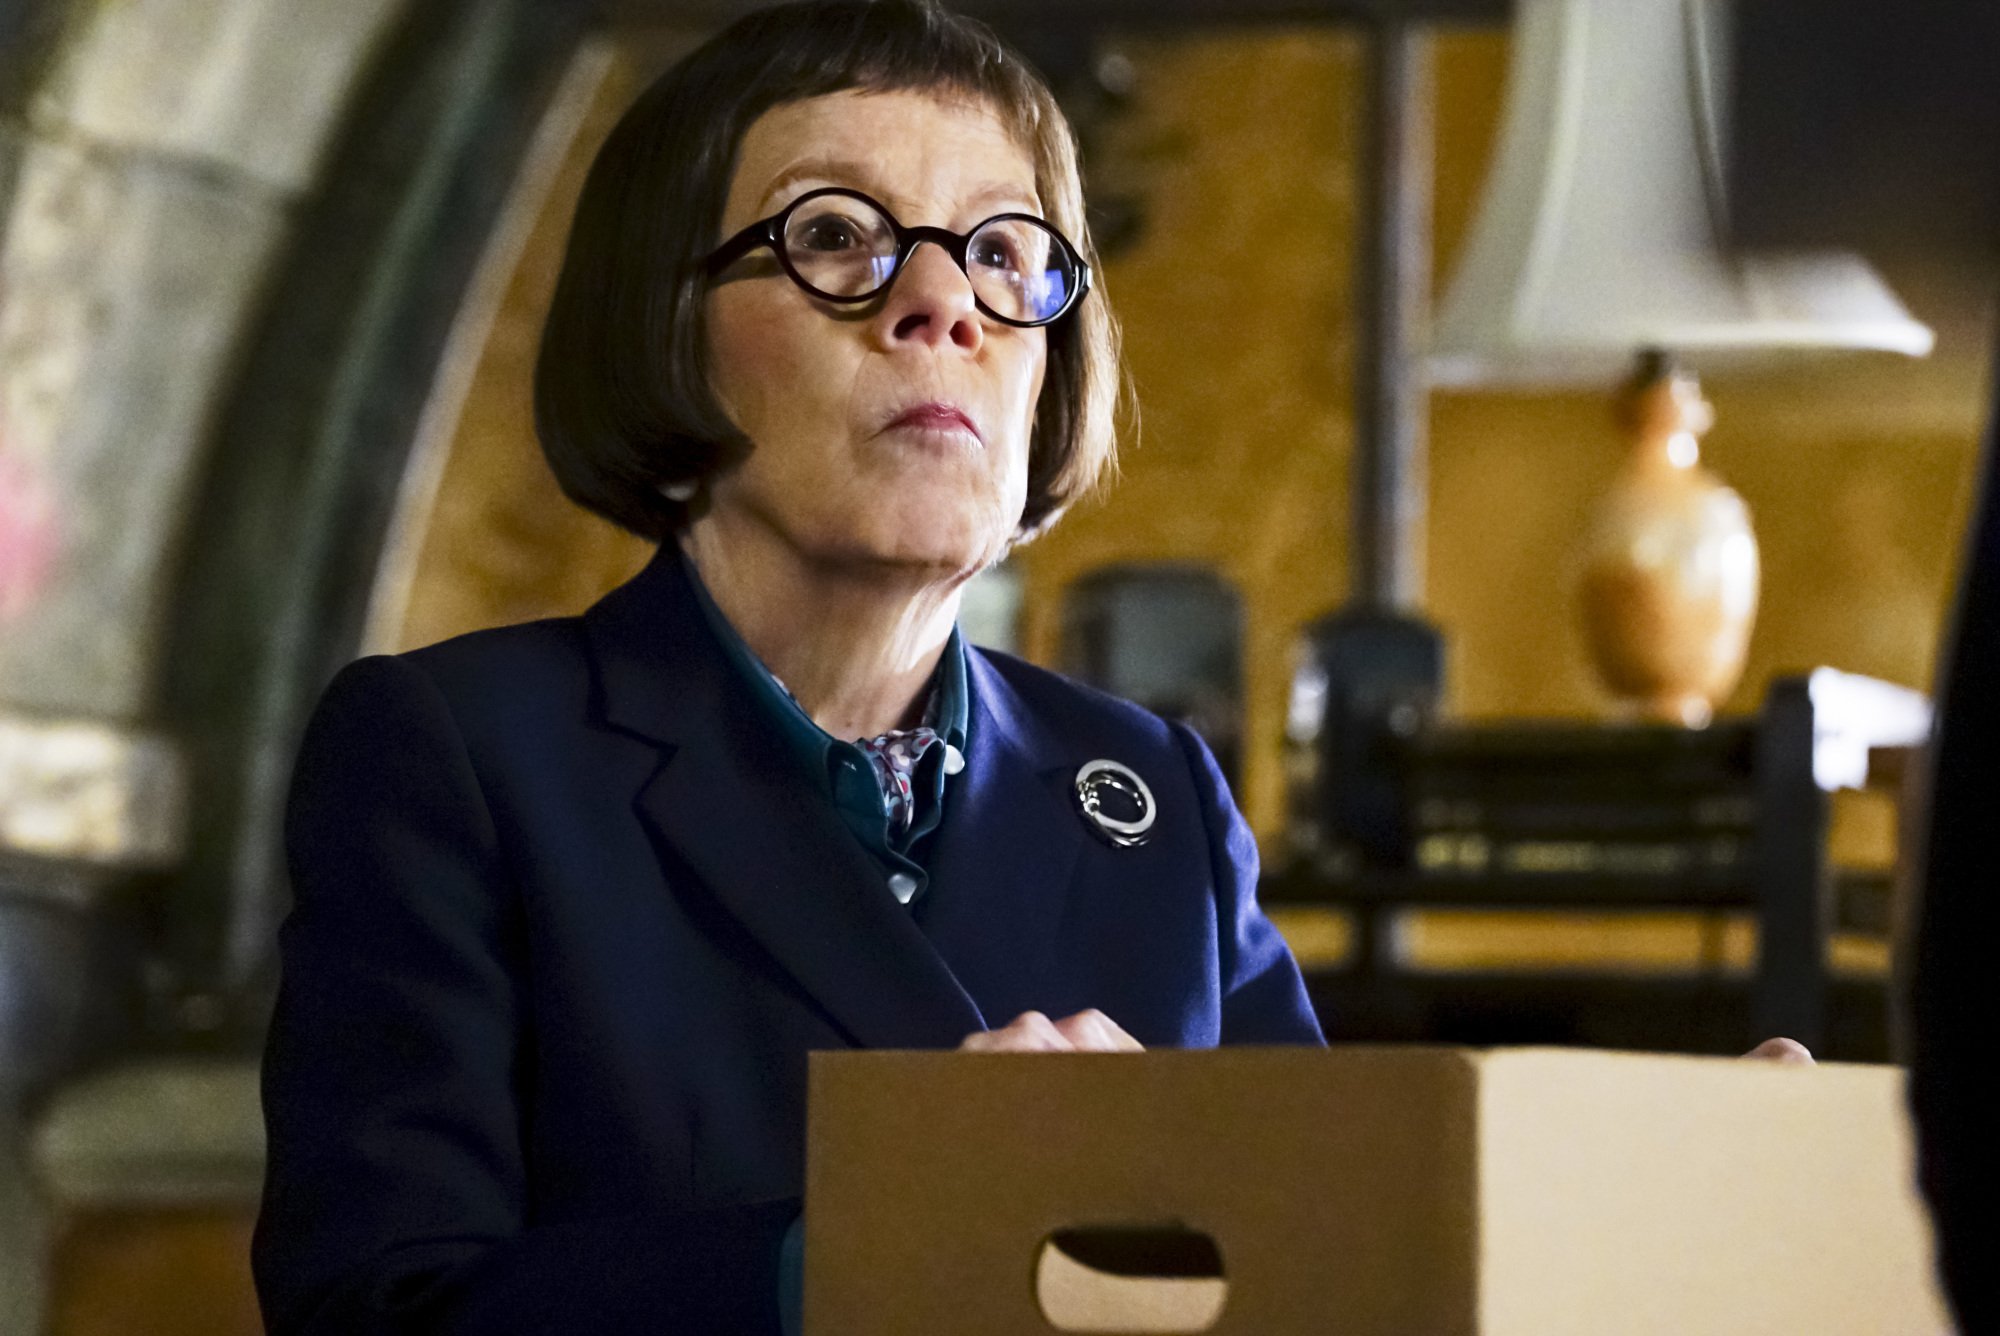 Linda Hunt in "NCIS: Los Angeles" on 25 September 2016 | Source: Getty Images